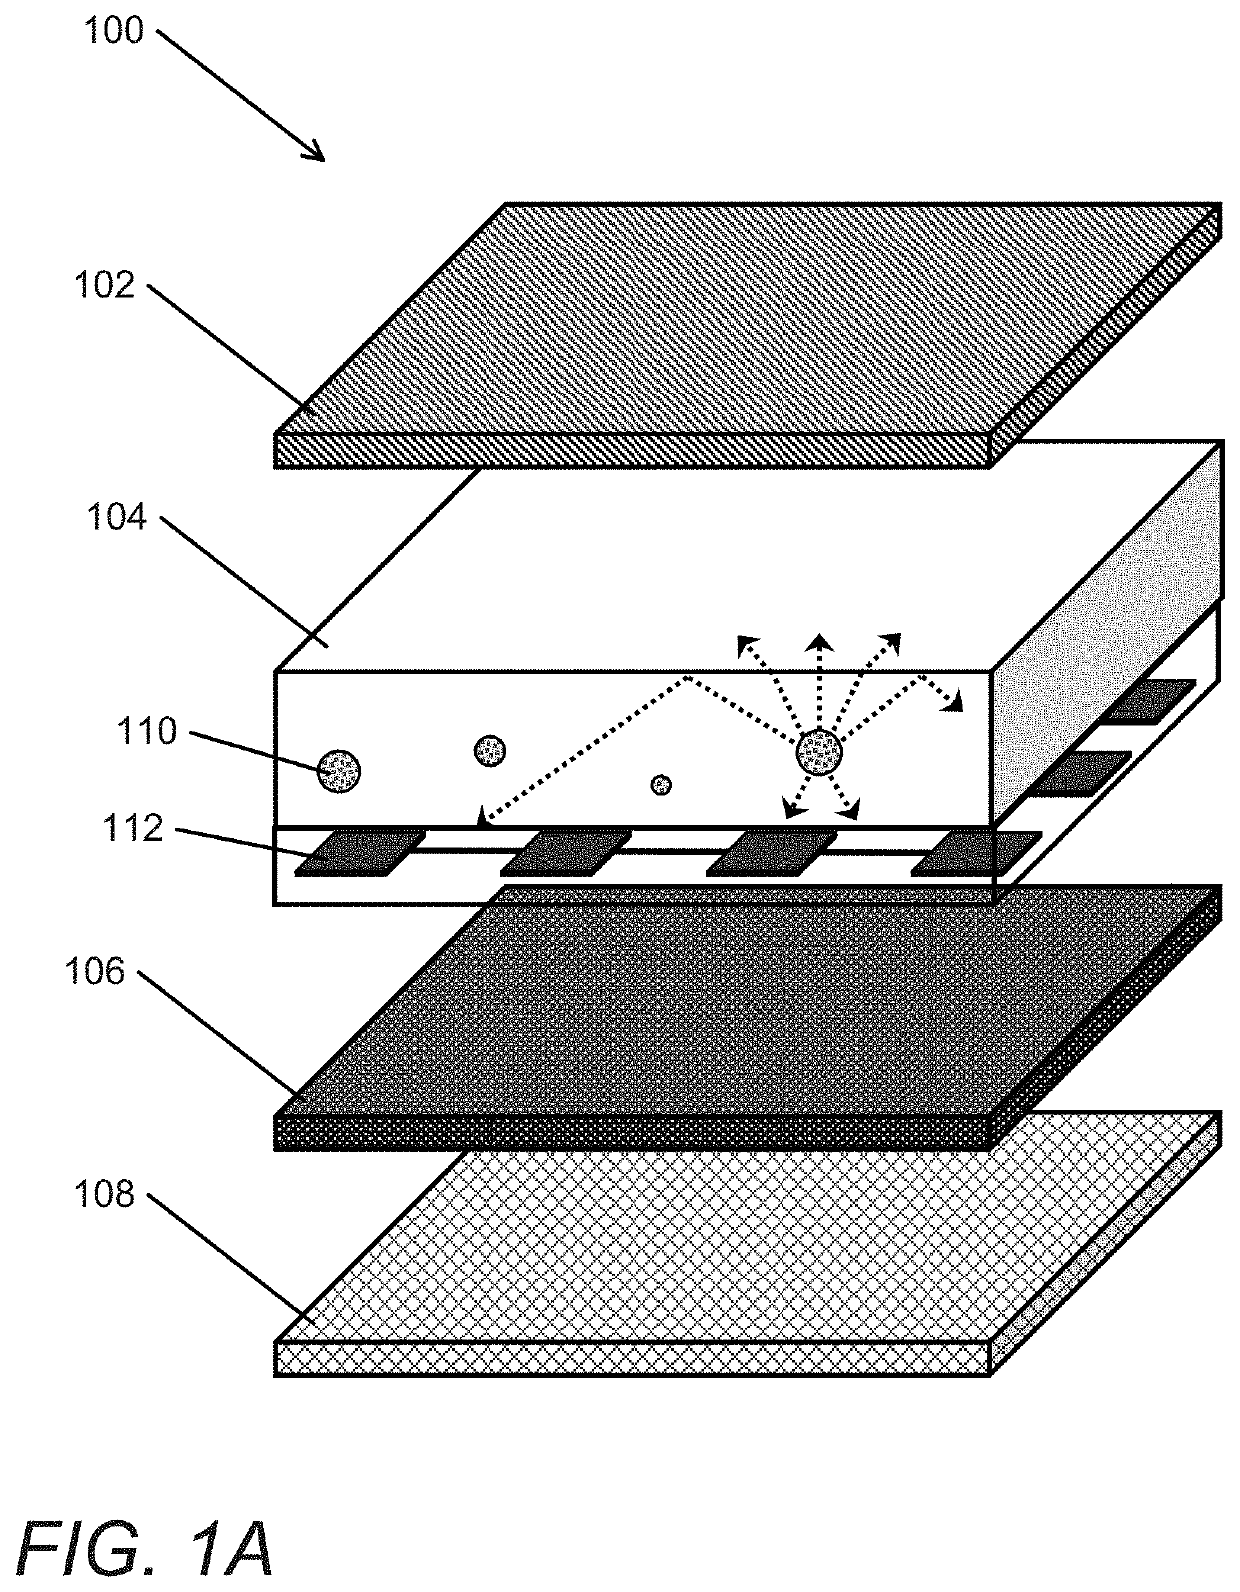 Luminescent solar concentrators and related methods of manufacturing